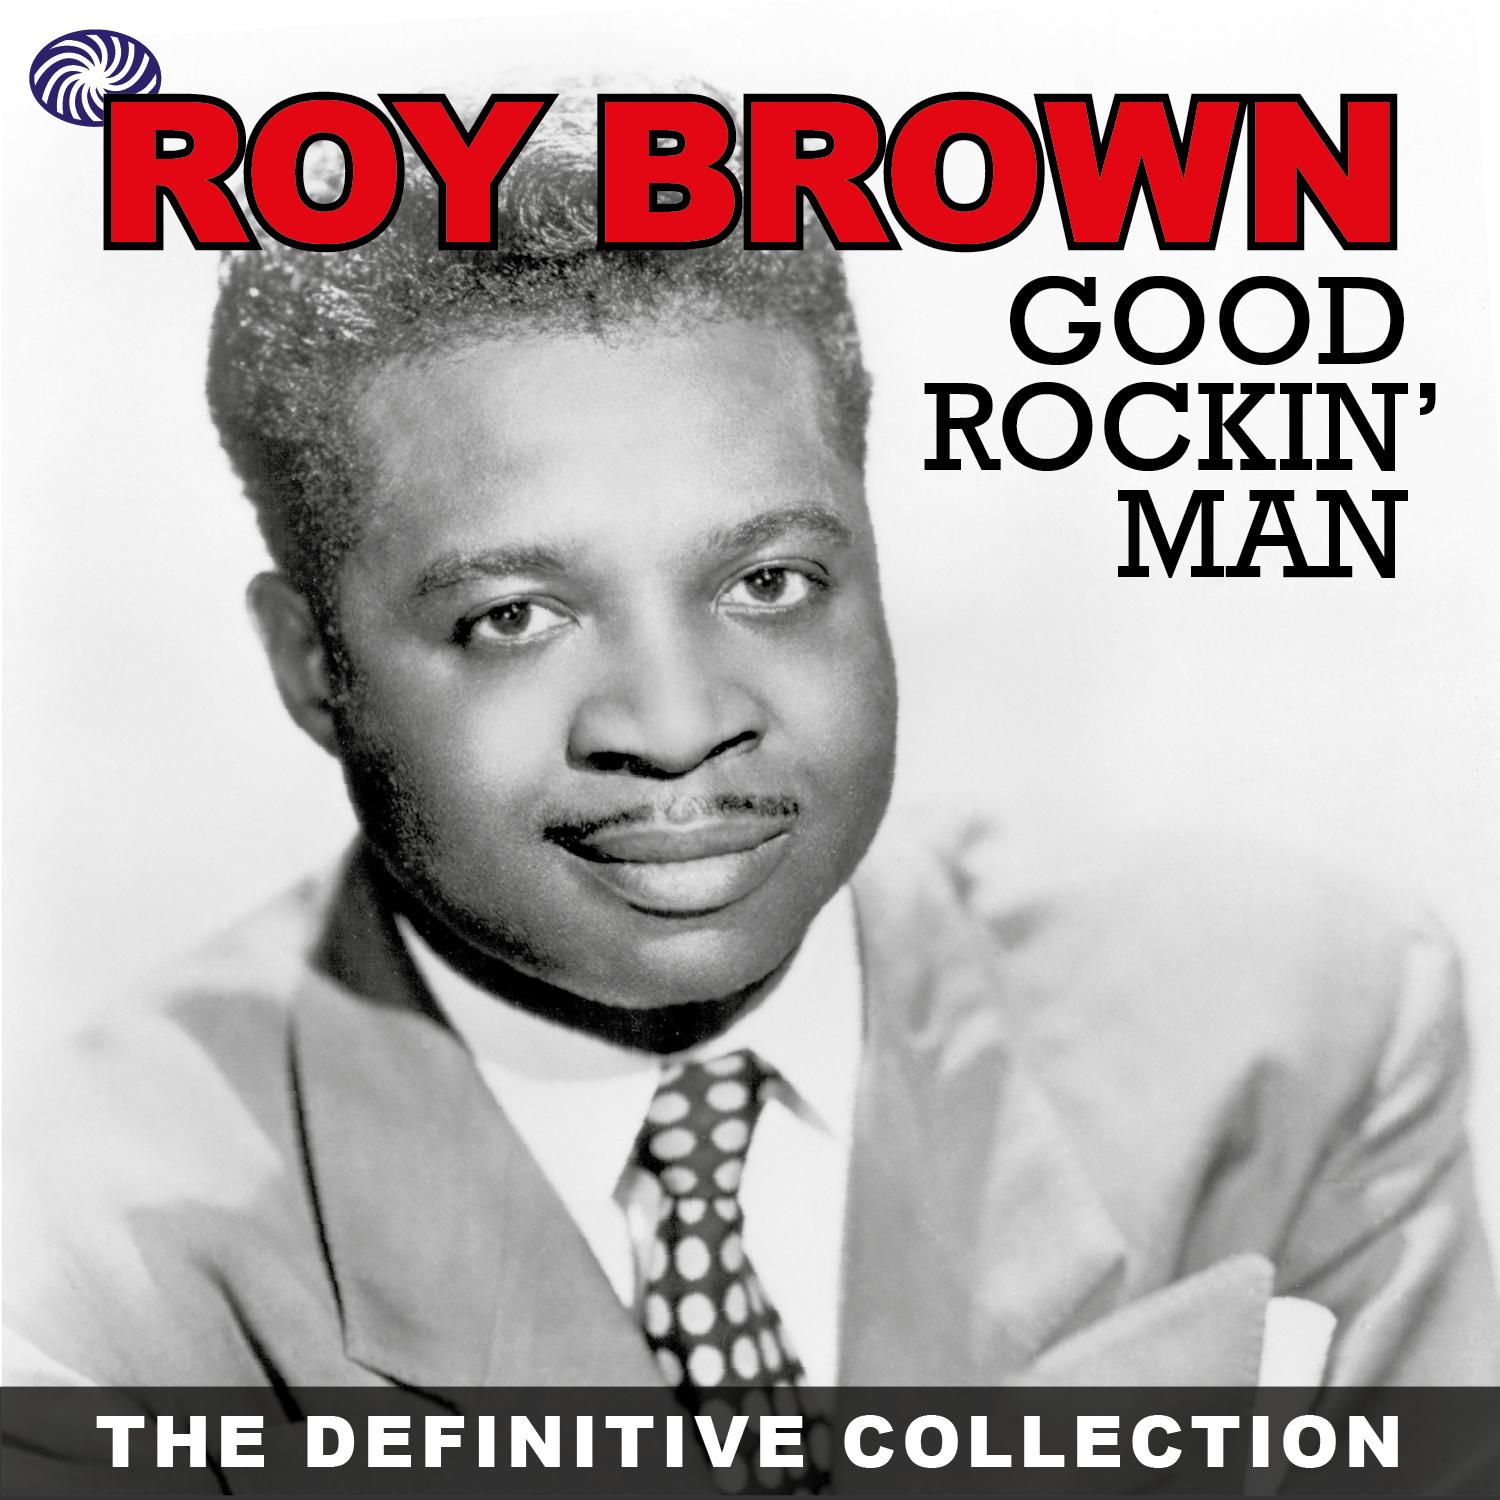 Good Rockin' Man: The Definitive Collection